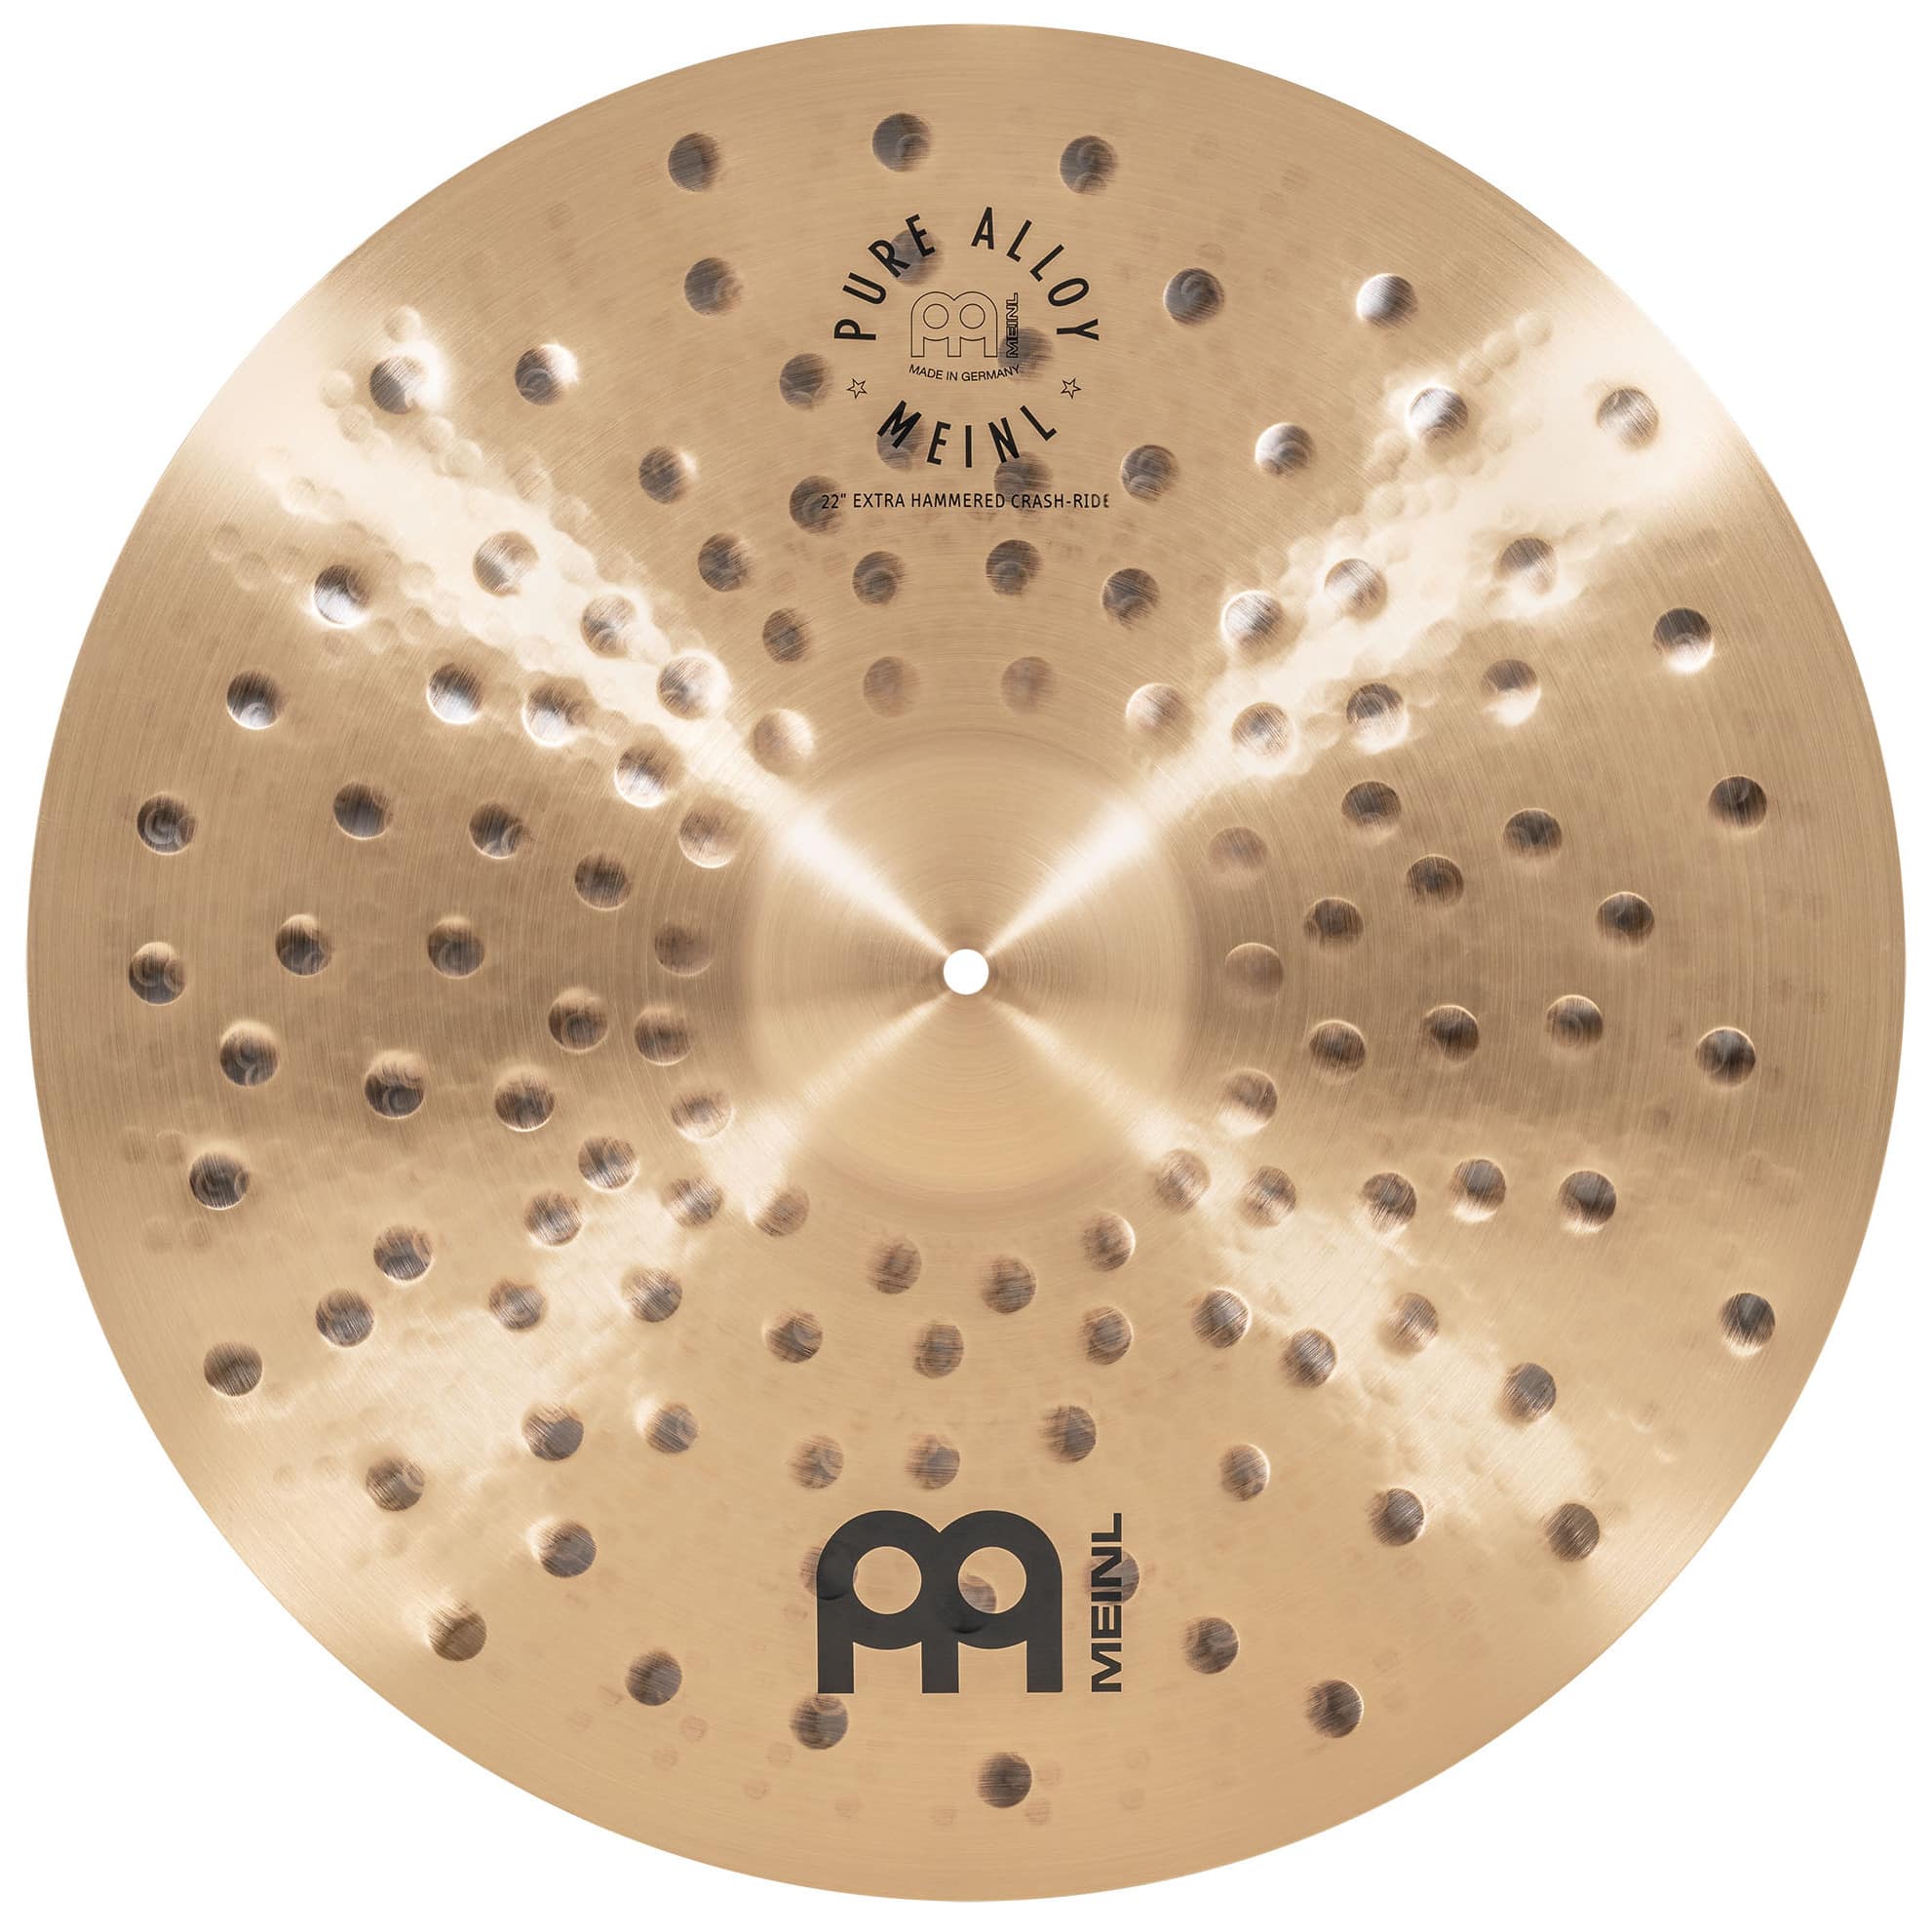 Meinl Cymbals PA22EHCR - 22" Pure Alloy Extra Hammered CrashRide